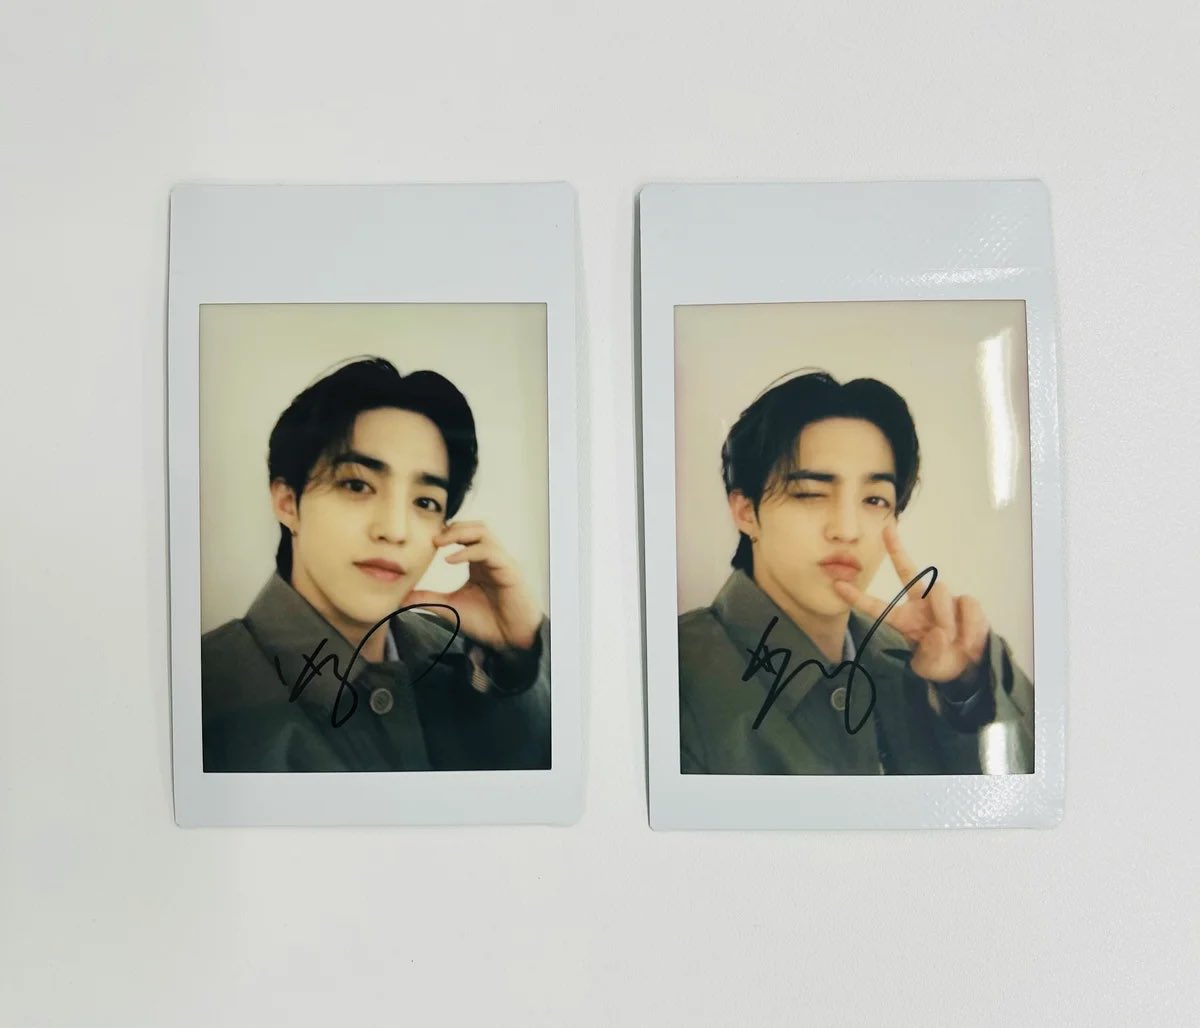 oh these polaroids are so cute!!!! 😍